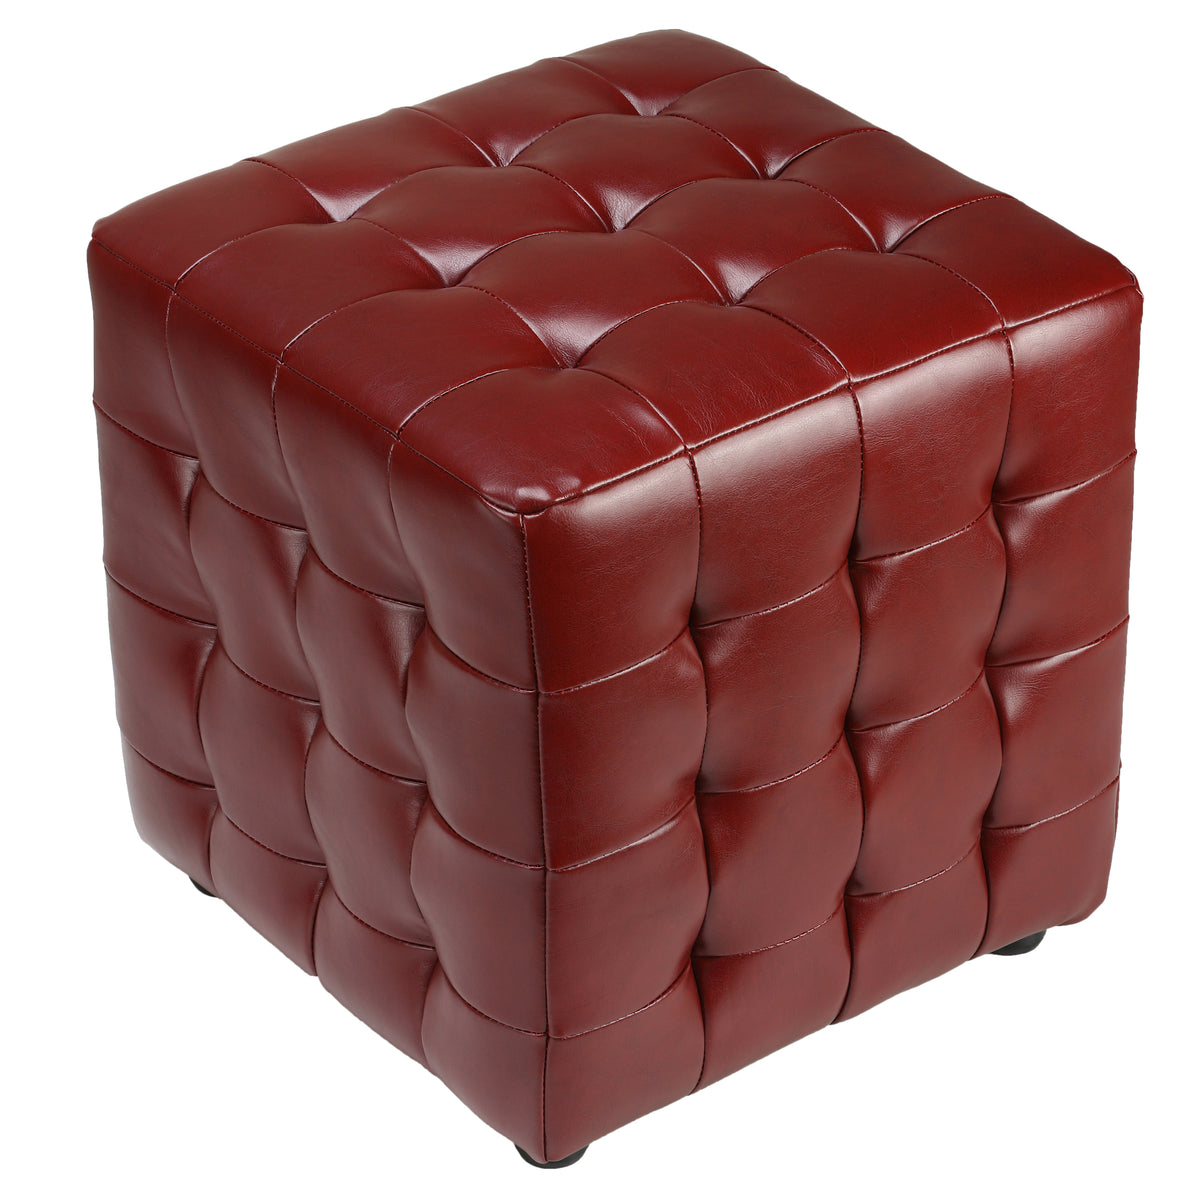 Cortesi Home Izzo Tufted Cube Ottoman in Cherry Red Bonded Leather